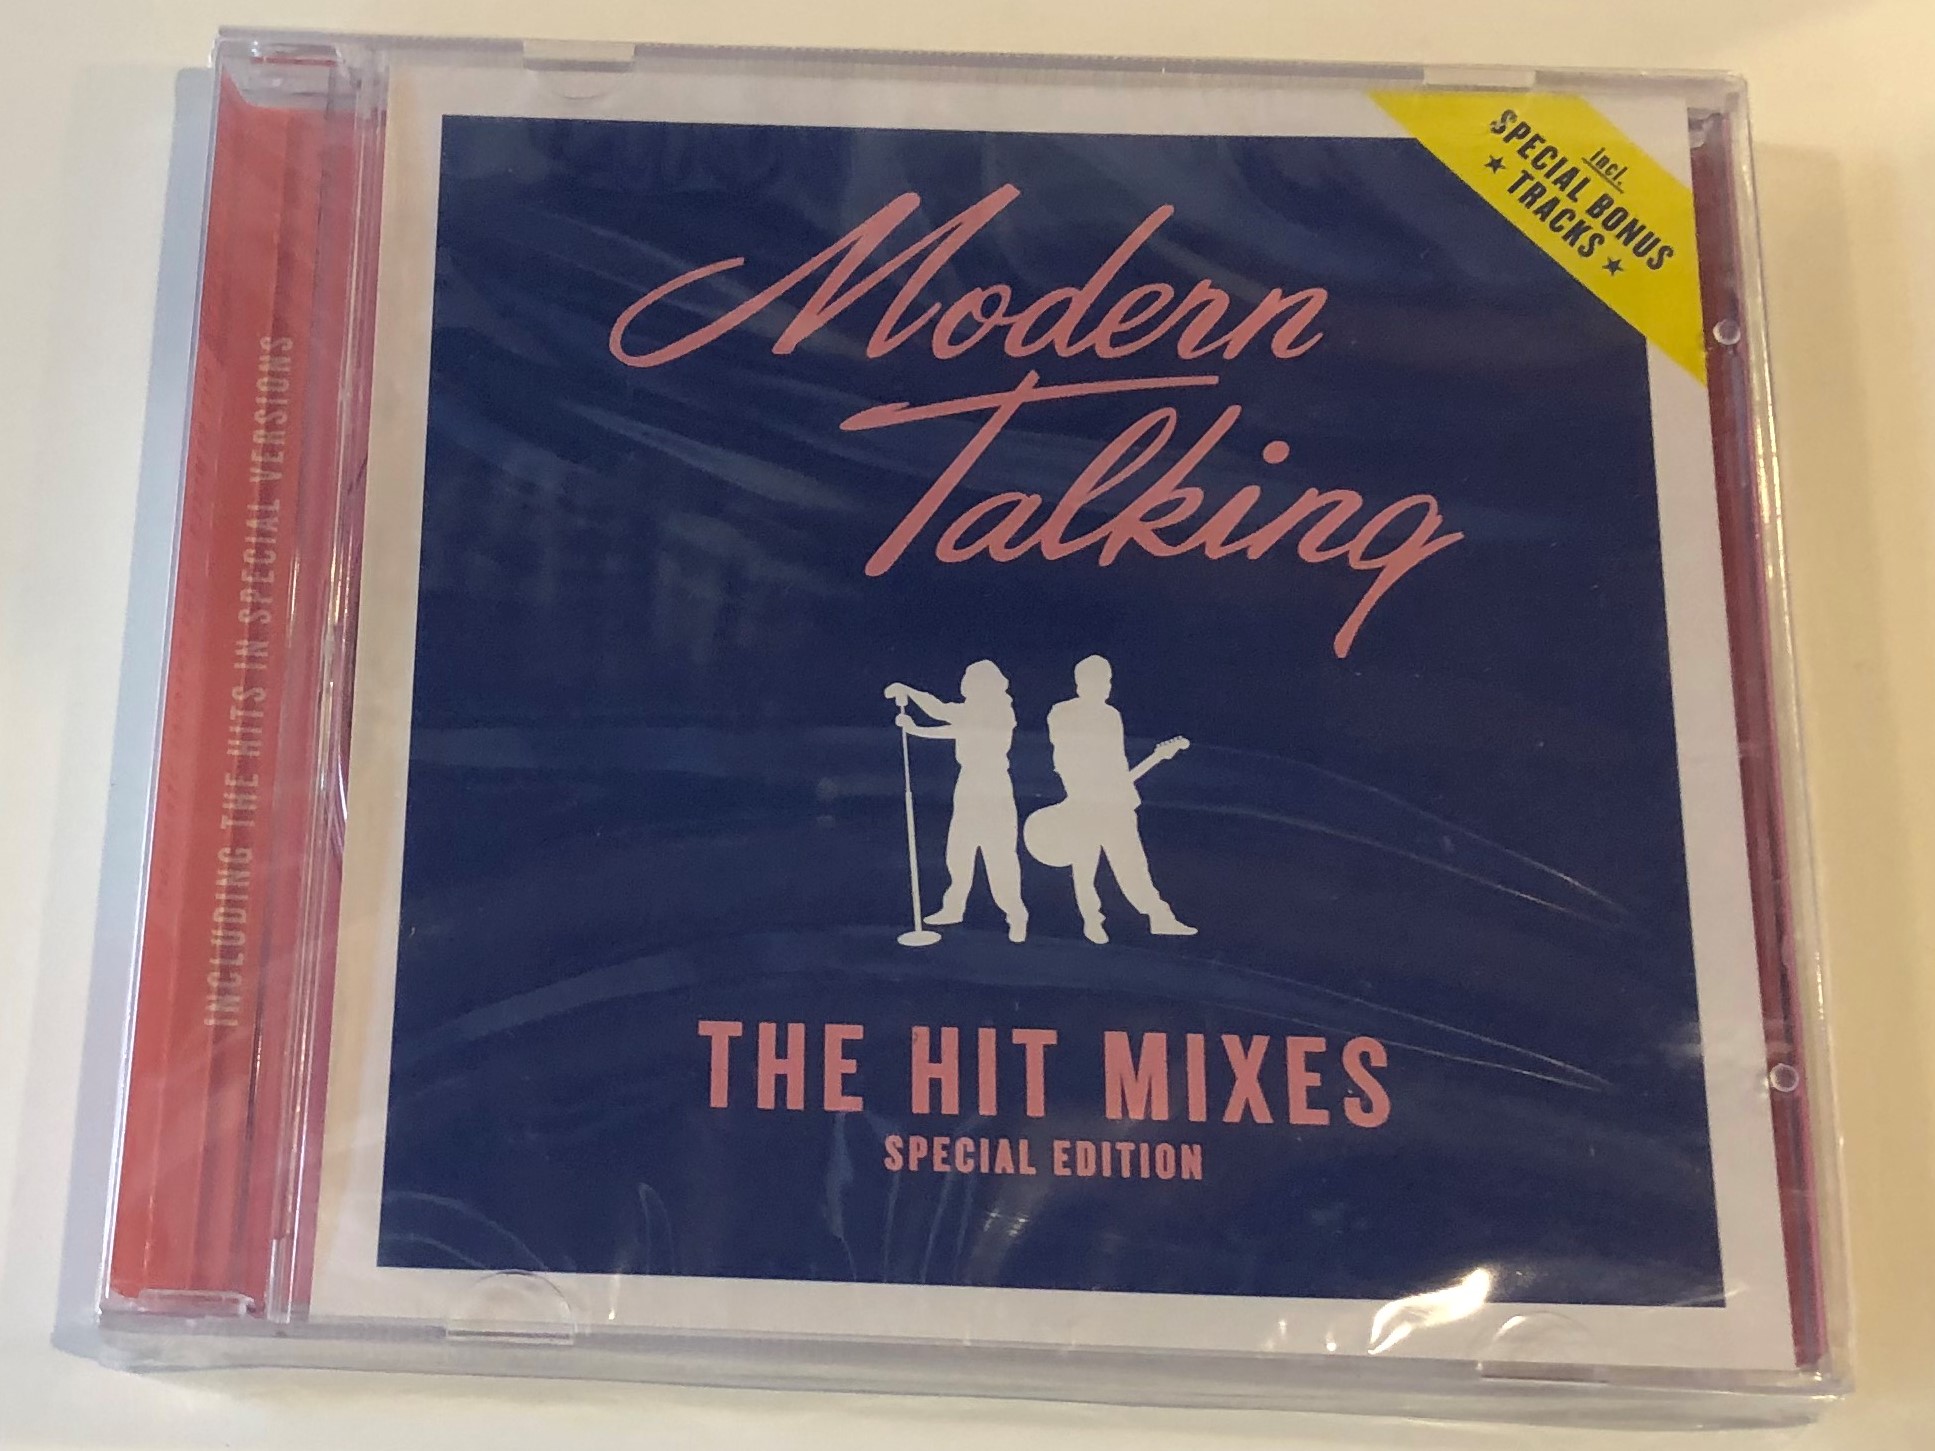 modern-talking-the-hit-mixes-special-edition-including-the-hits-in-special-editions-eurostars-audio-cd-es5612-1-.jpg